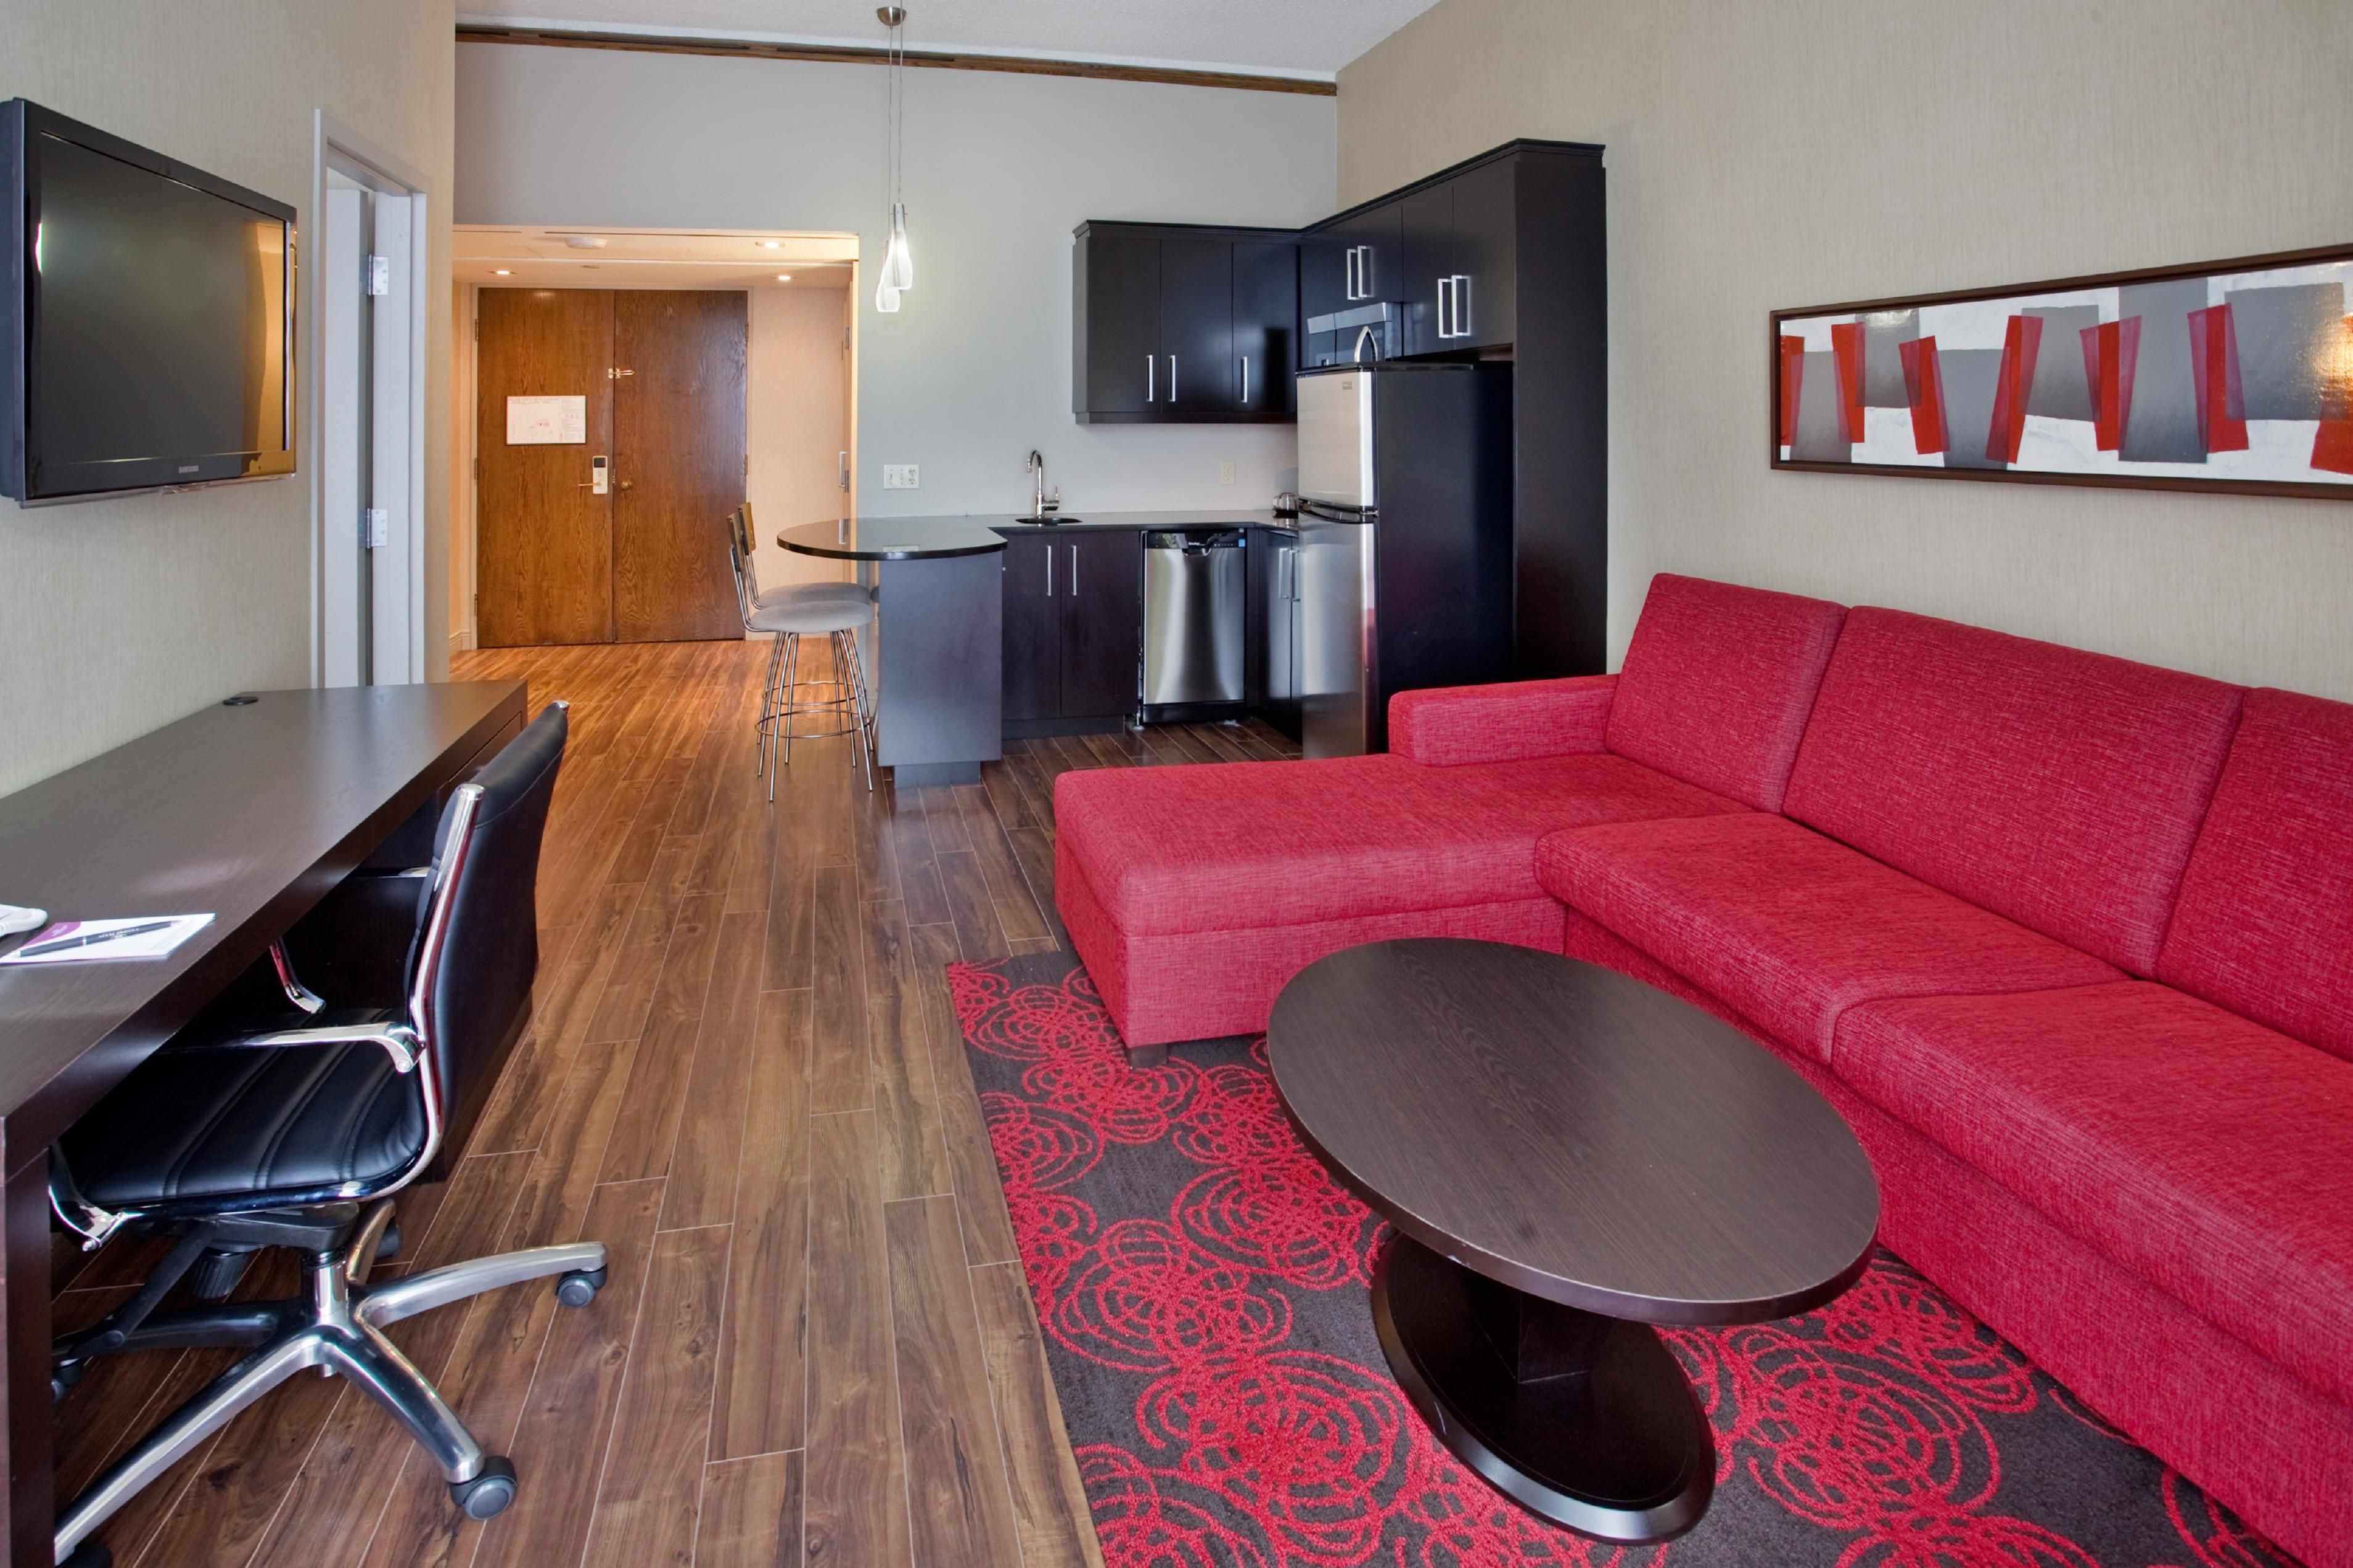 Executive suite, excellent for the business traveller